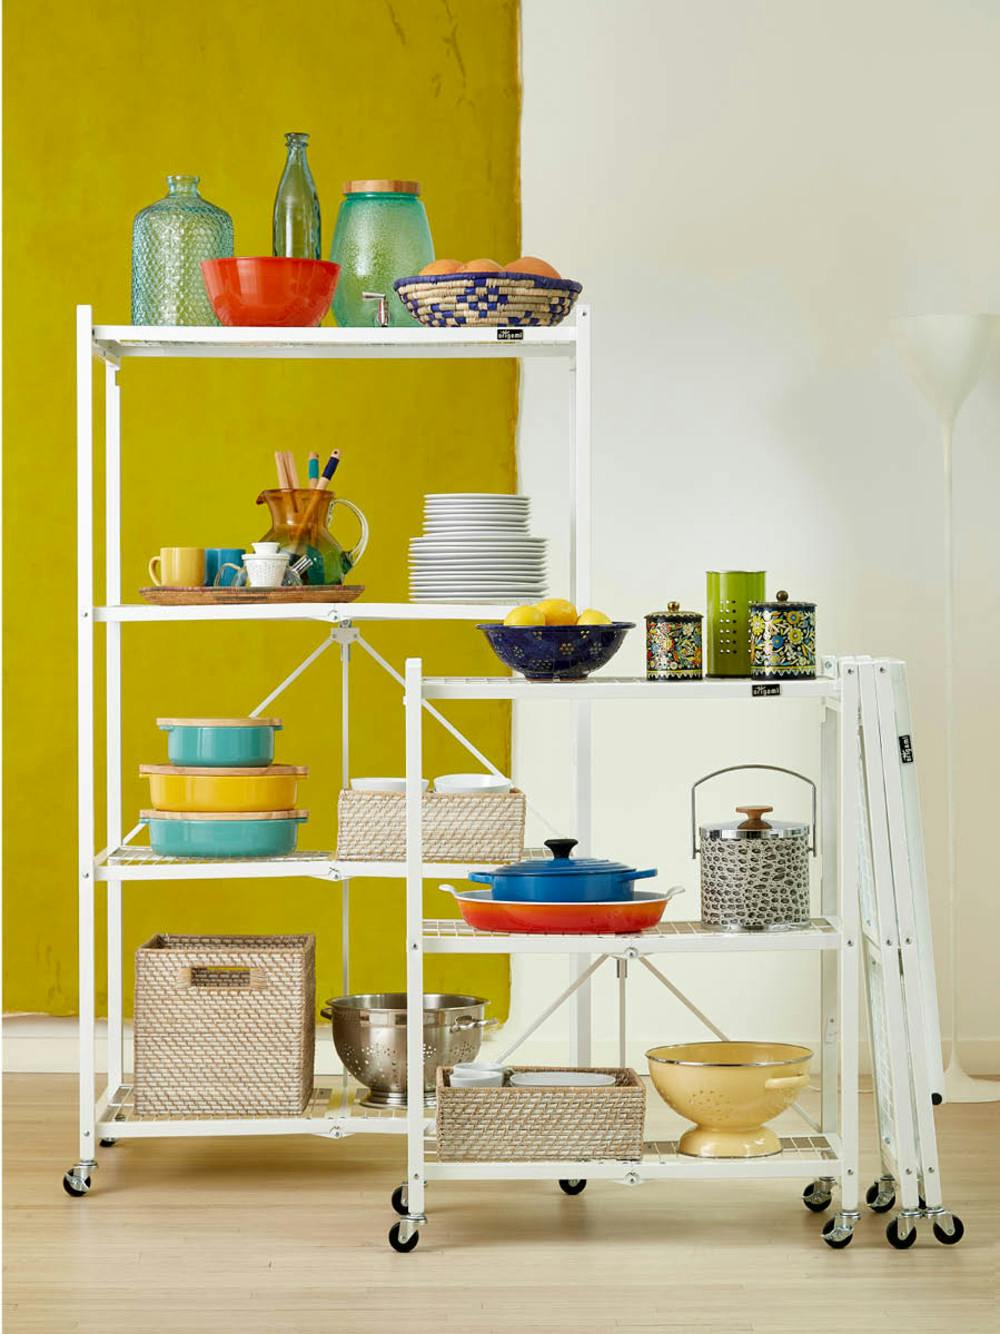 10 Small Space Shelving Solutions That Maximize Your Storage Potential